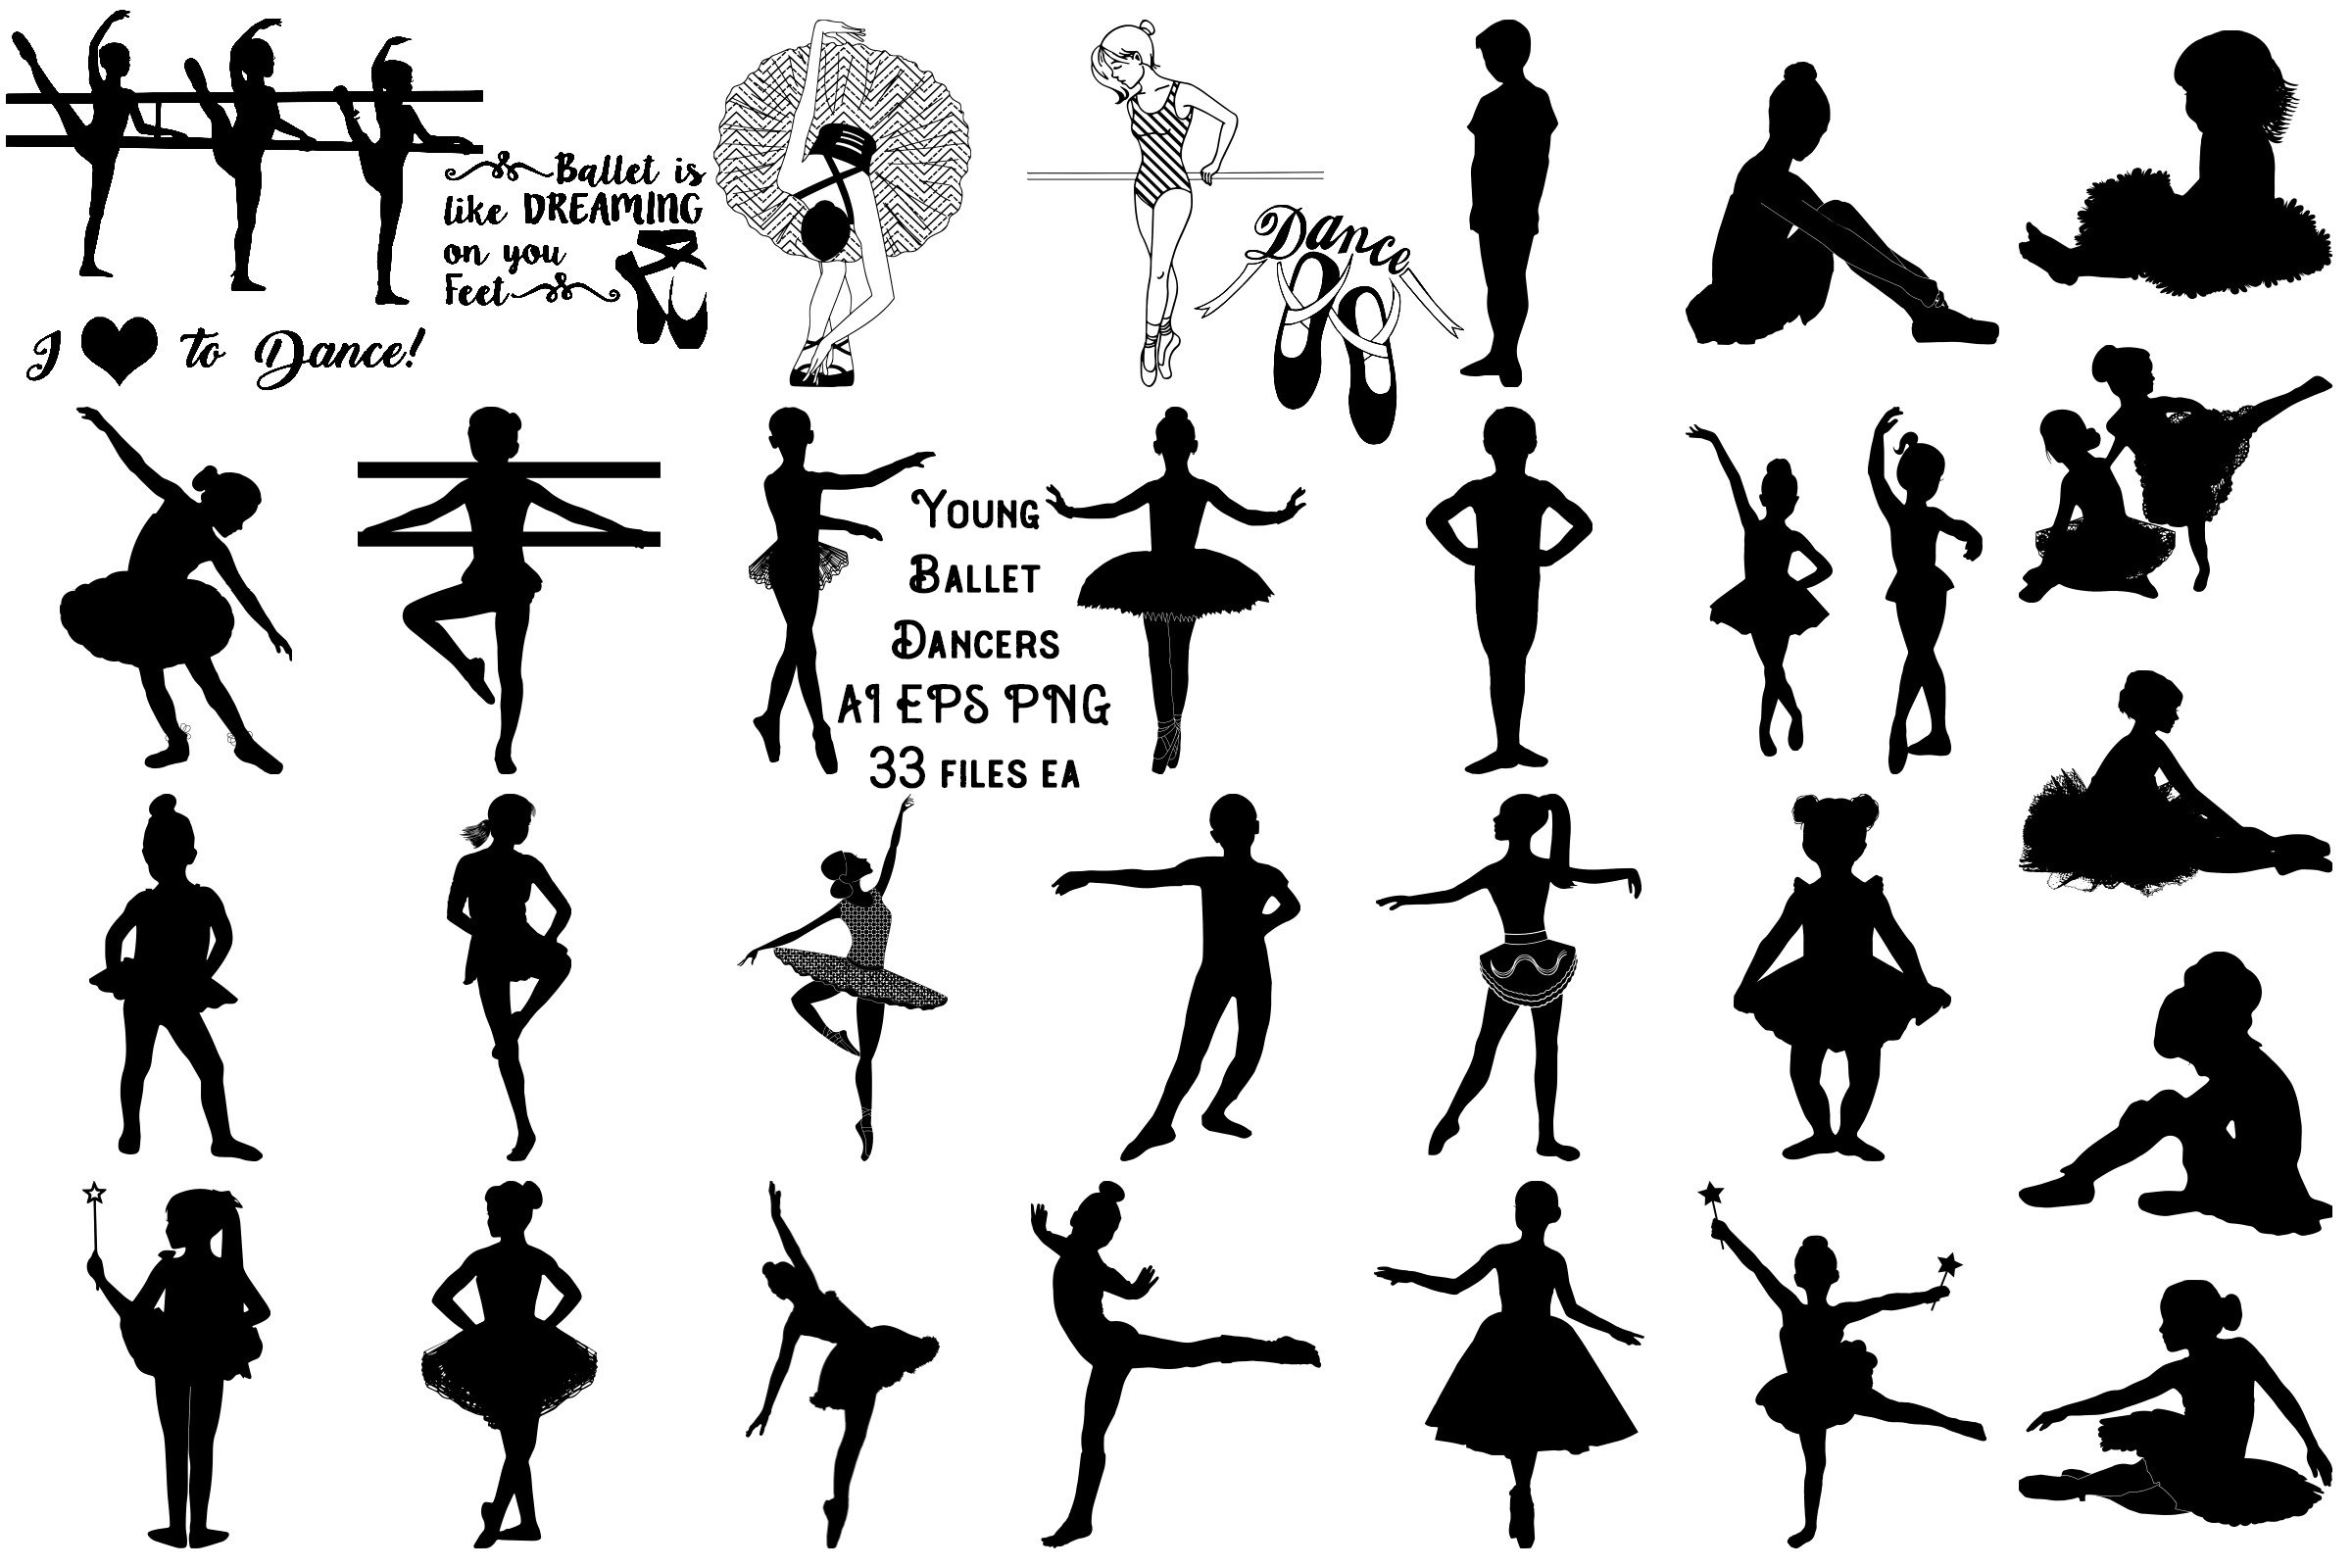 Young Ballet Dancers AI EPS PNG cover image.